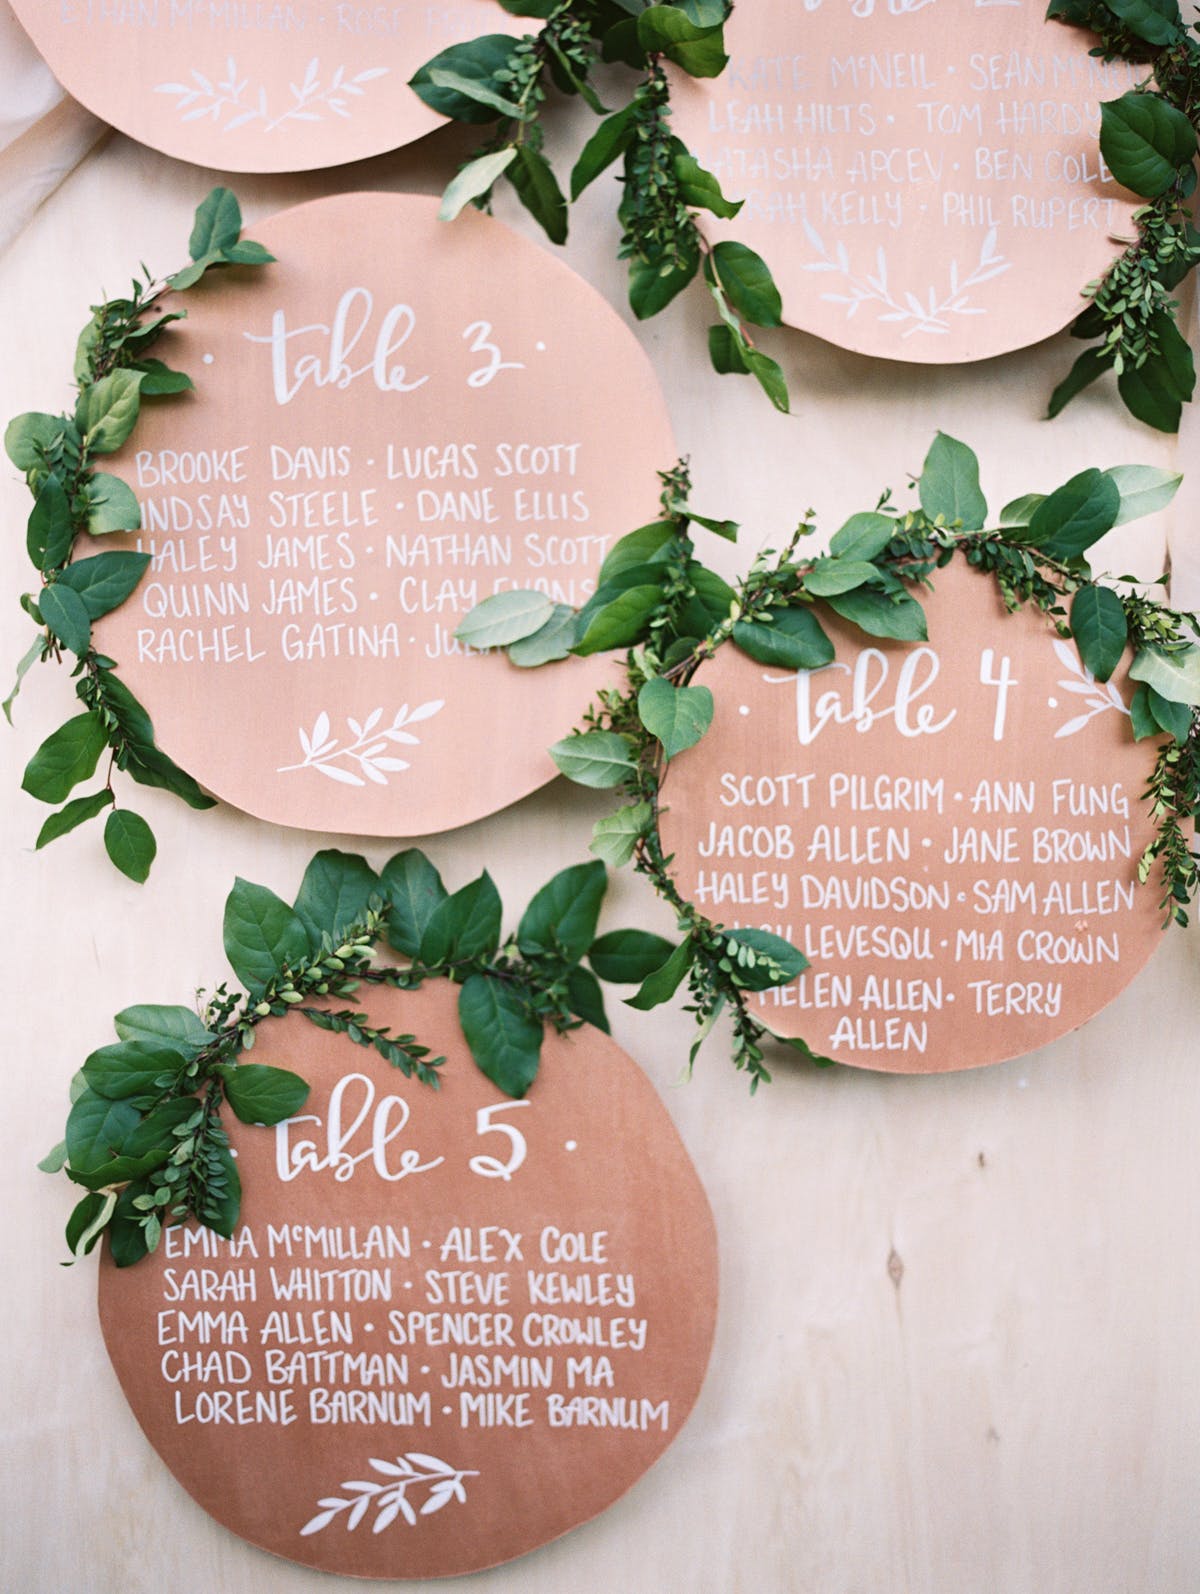 Copper Calligraphy Seating Chart / Photo Credit: Blush Wedding Photography